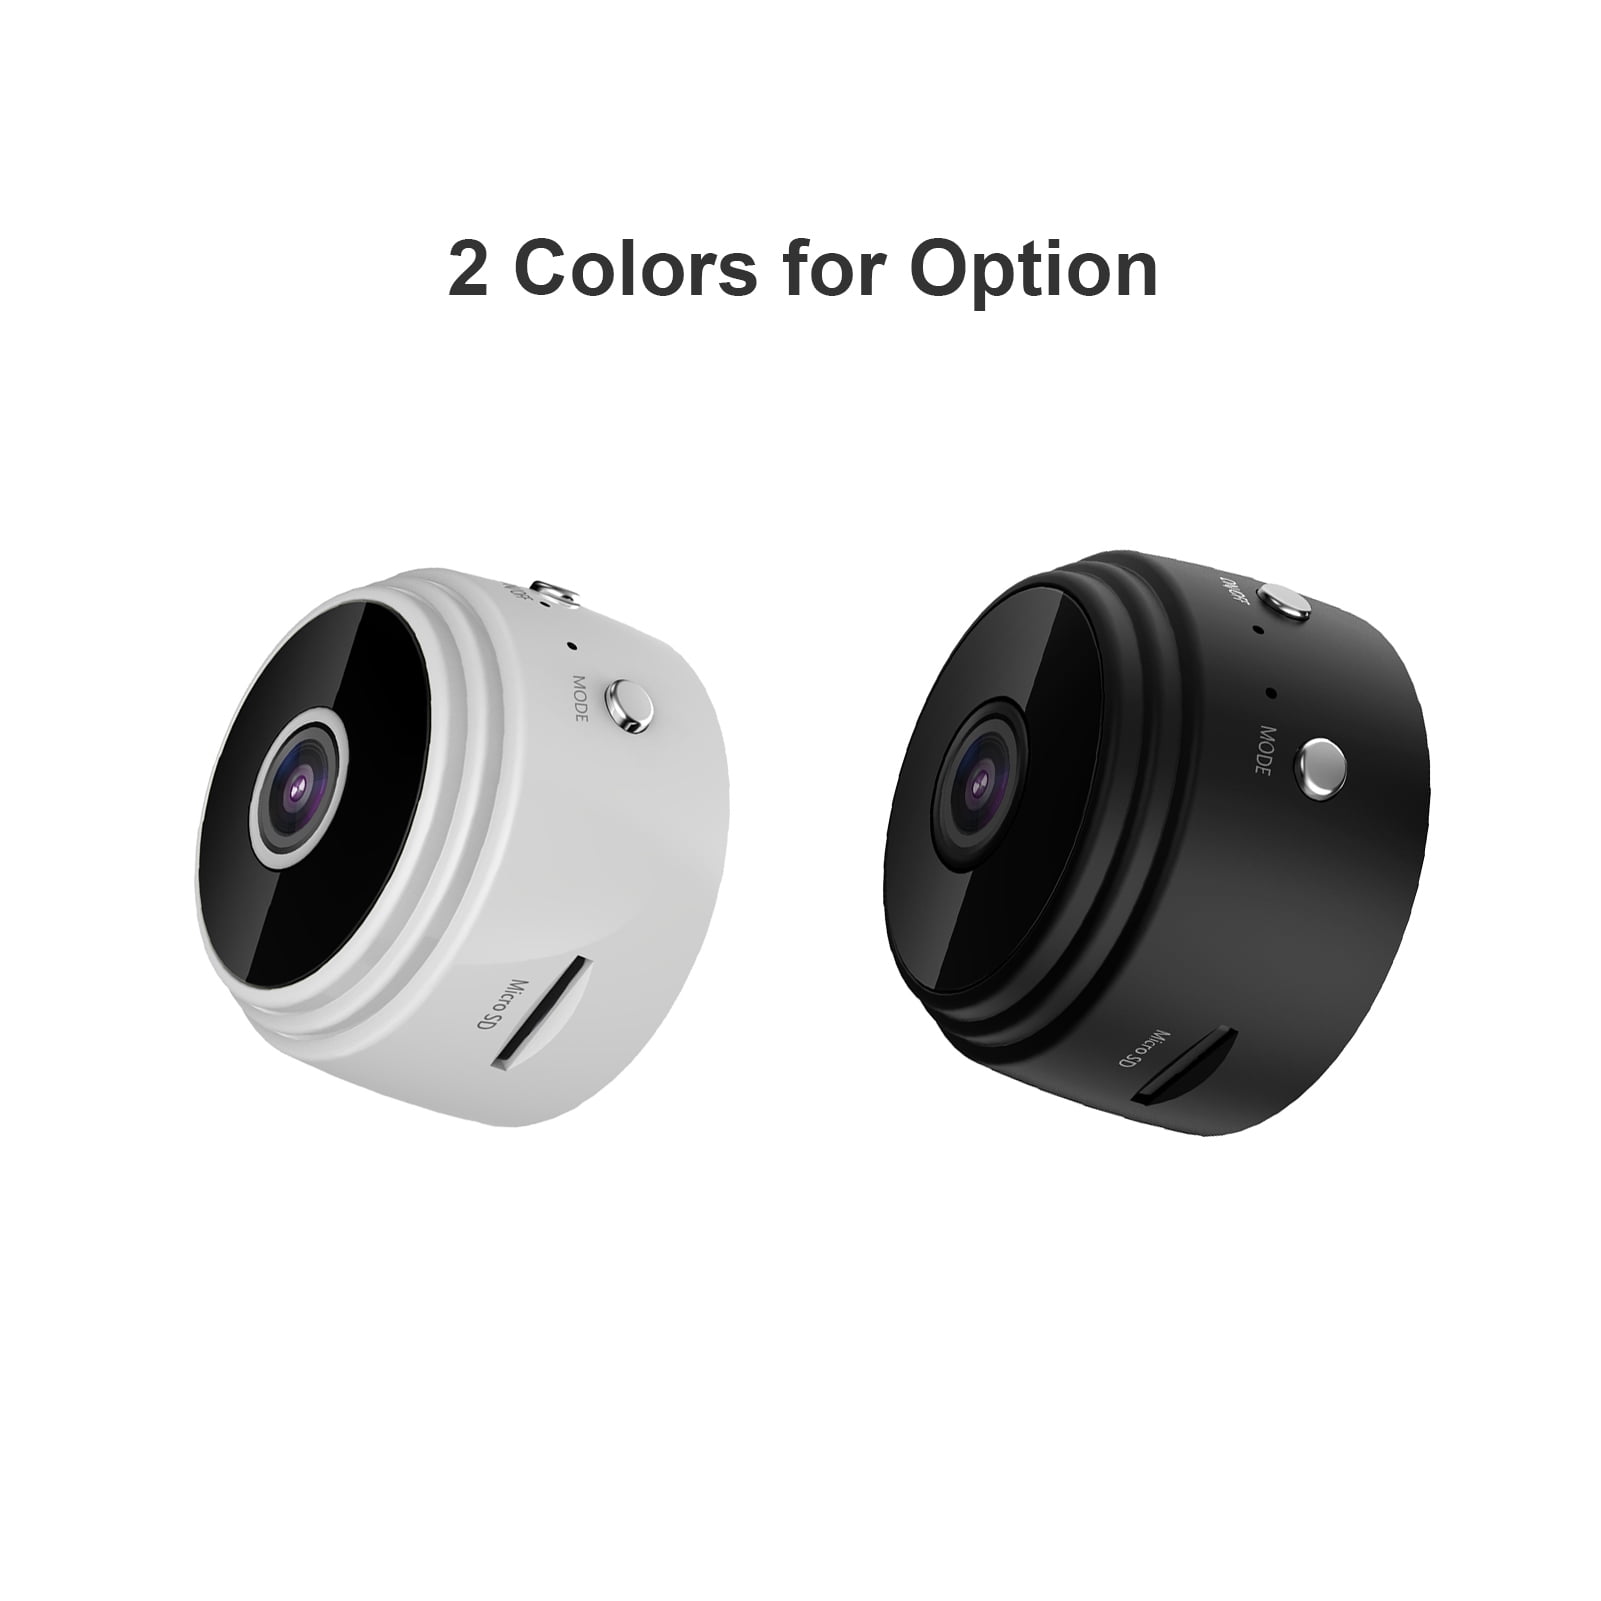 Fesjoy 1080P WiFi Mini Camera Video Cam Camcorder 150° Wide Angle IR Night Vision Motion Detection 128GB Extended Memory 240mAh Battery for Baby Animal Monitoring Home Security